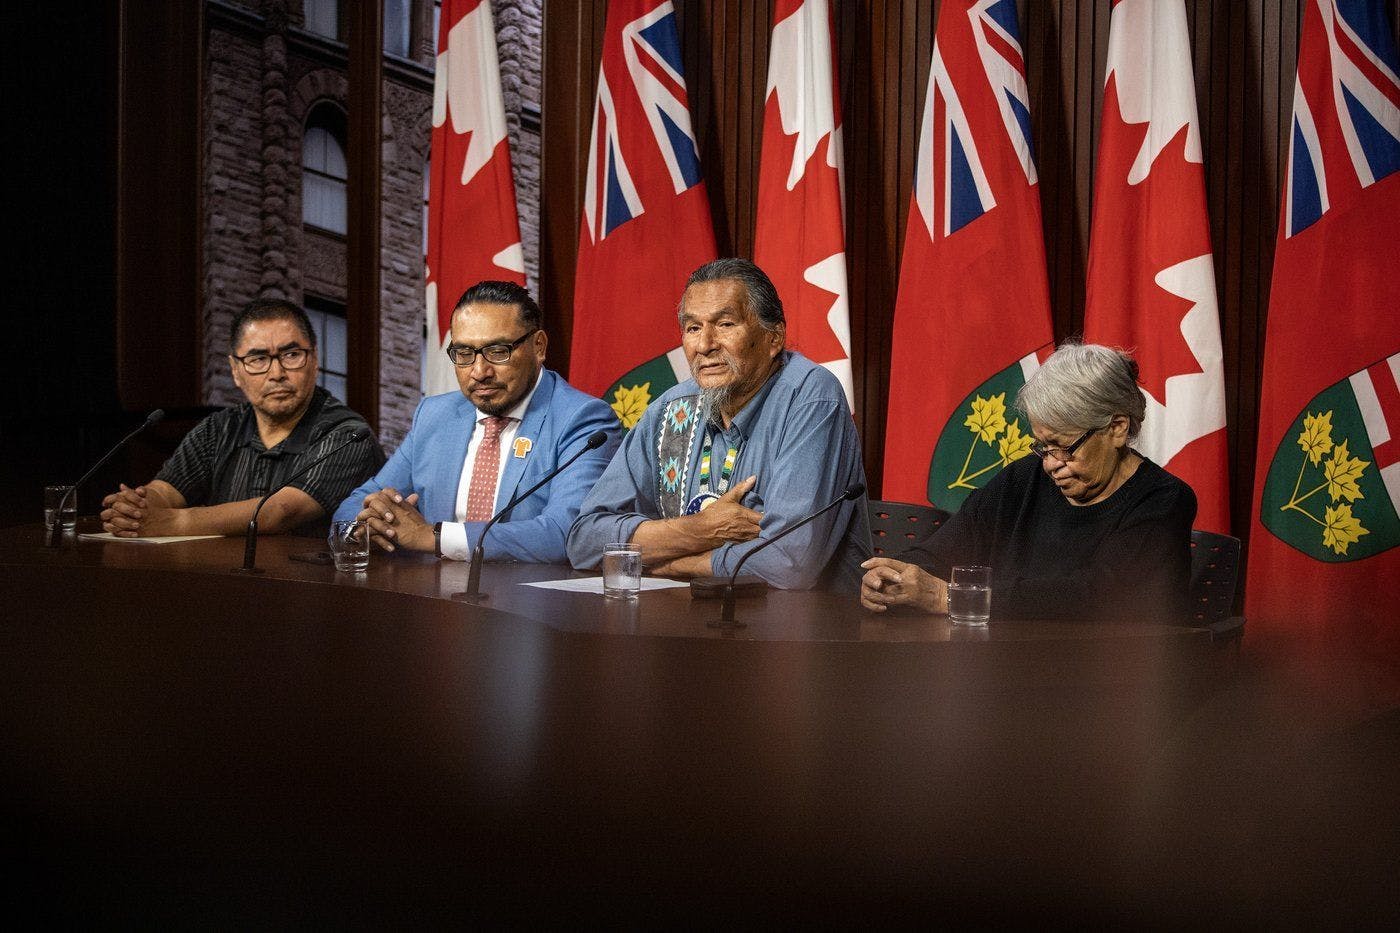 Several First Nations from Ring of Fire region demand meeting with Premier Doug Ford